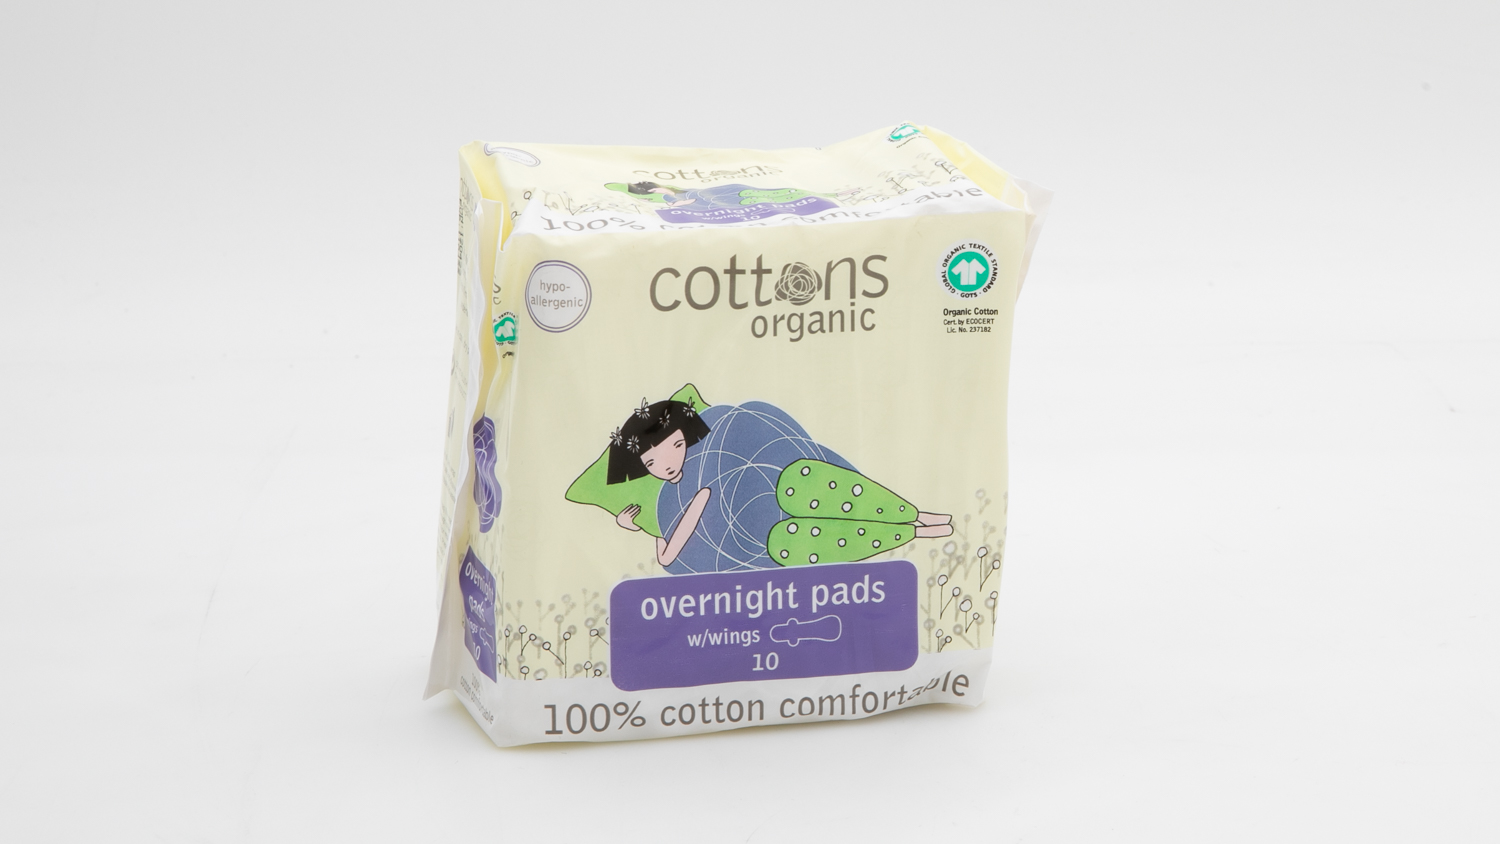 Cottons Organic Overnight Pads with wings Review, Sanitary pad